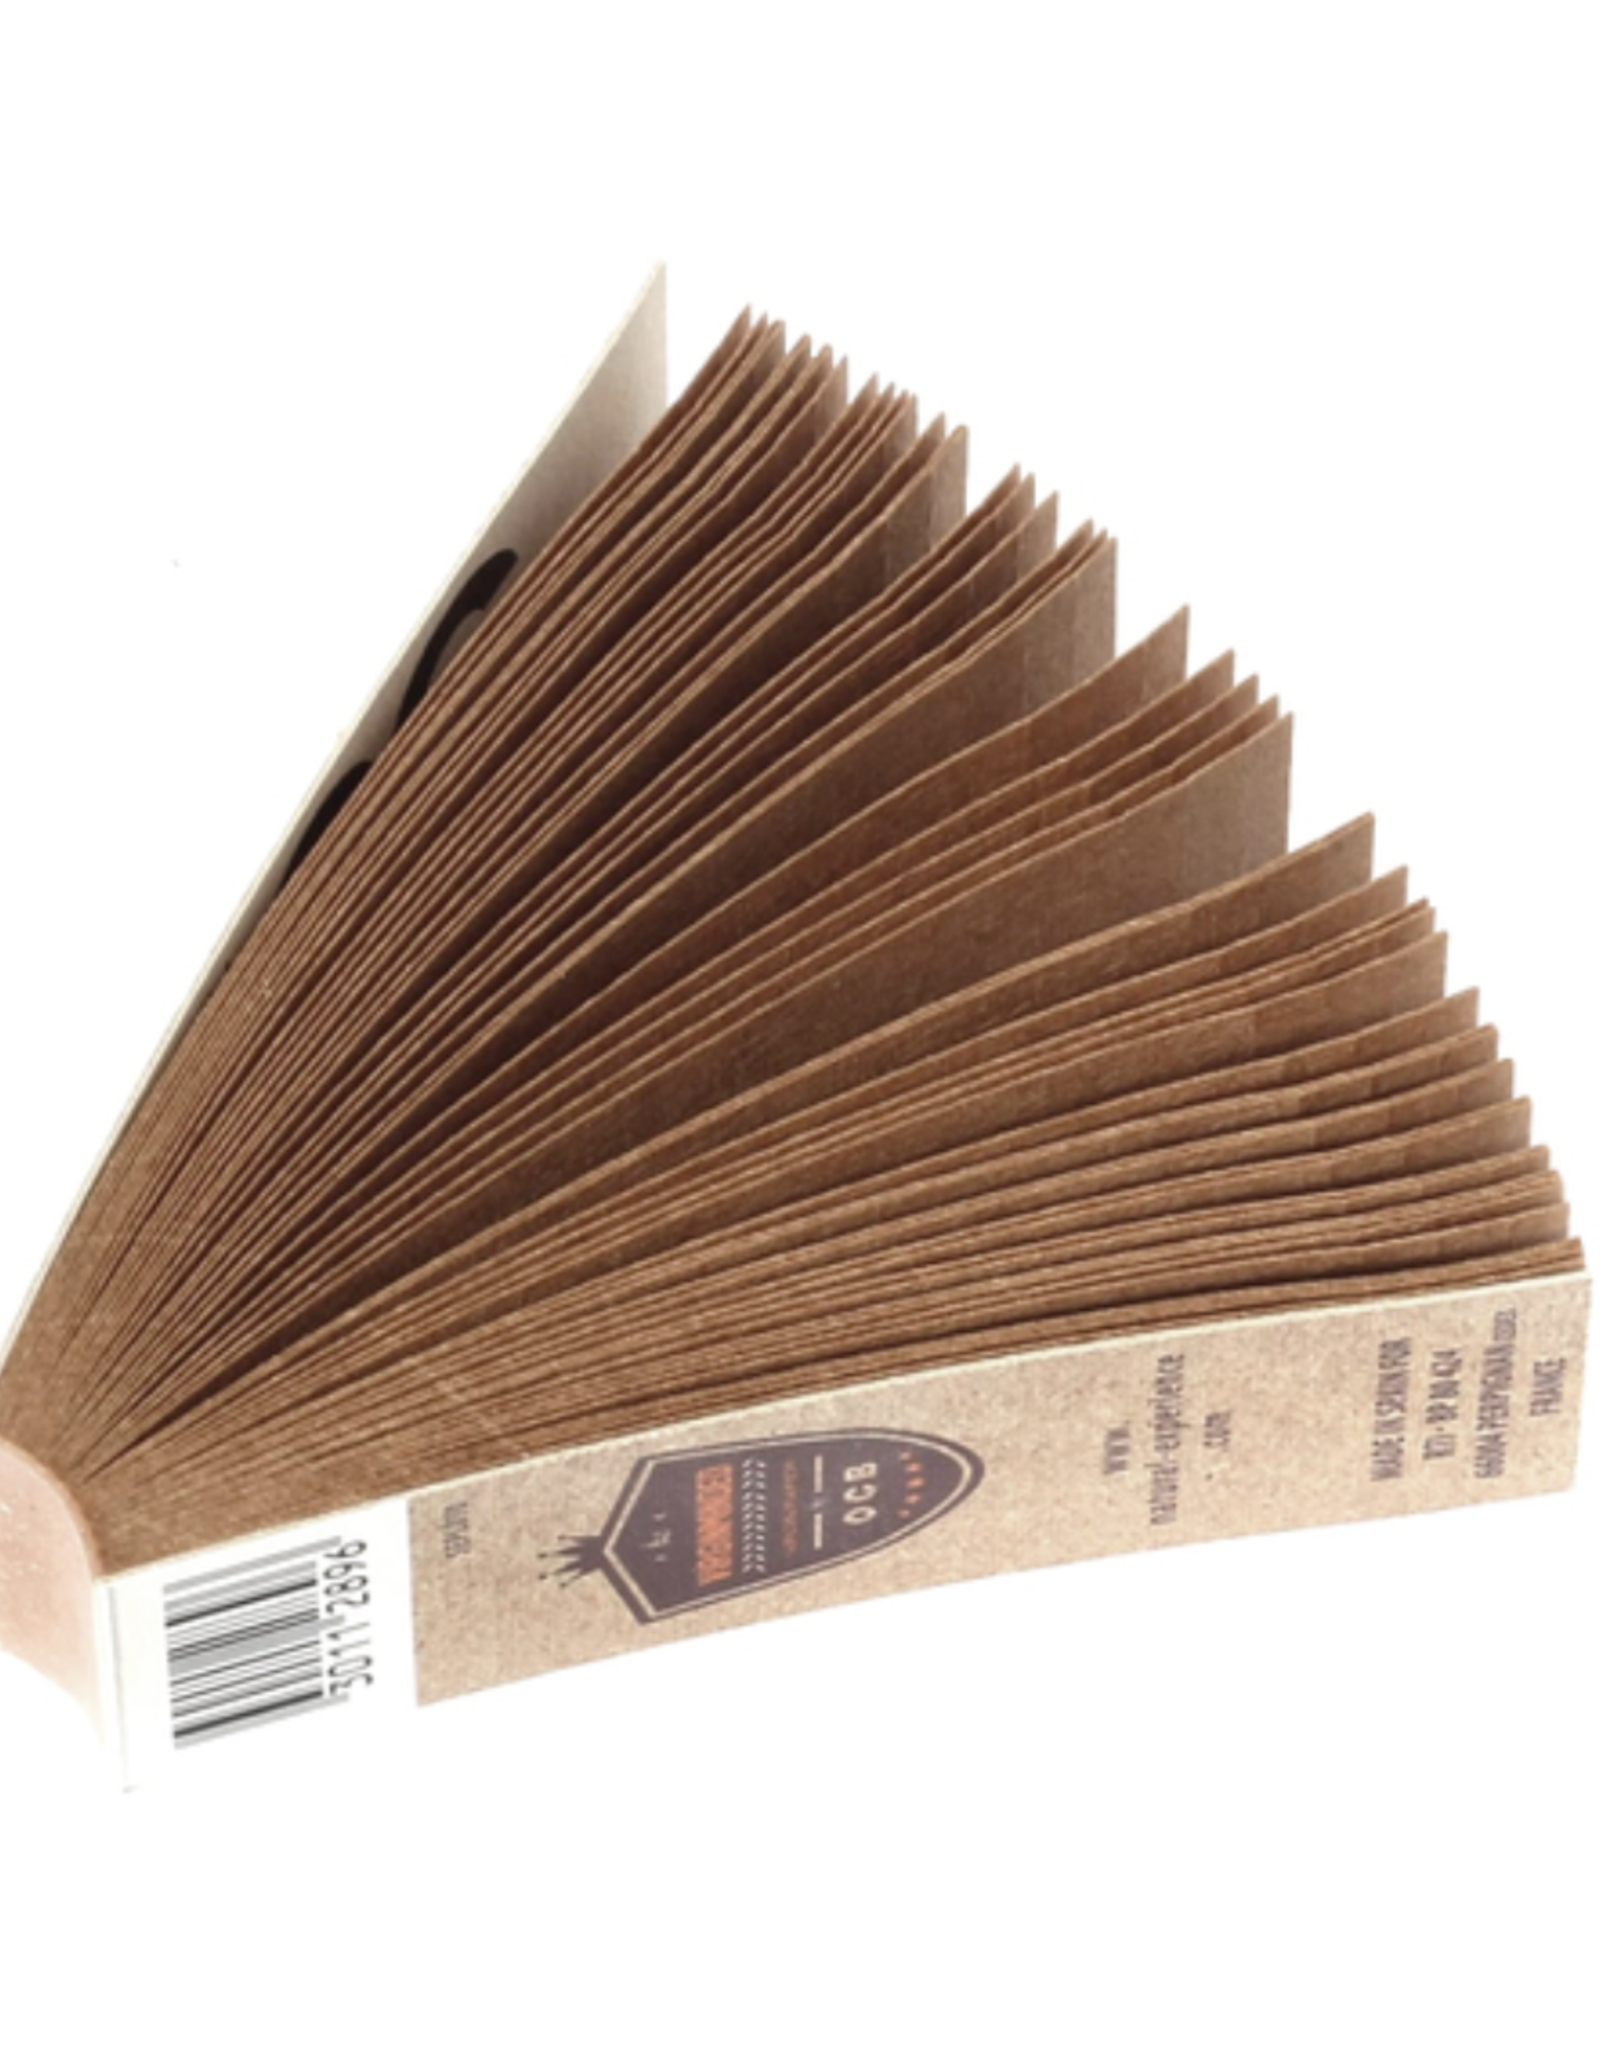 OCB OCB Virgin Unbleached Filters Perforated Booklets